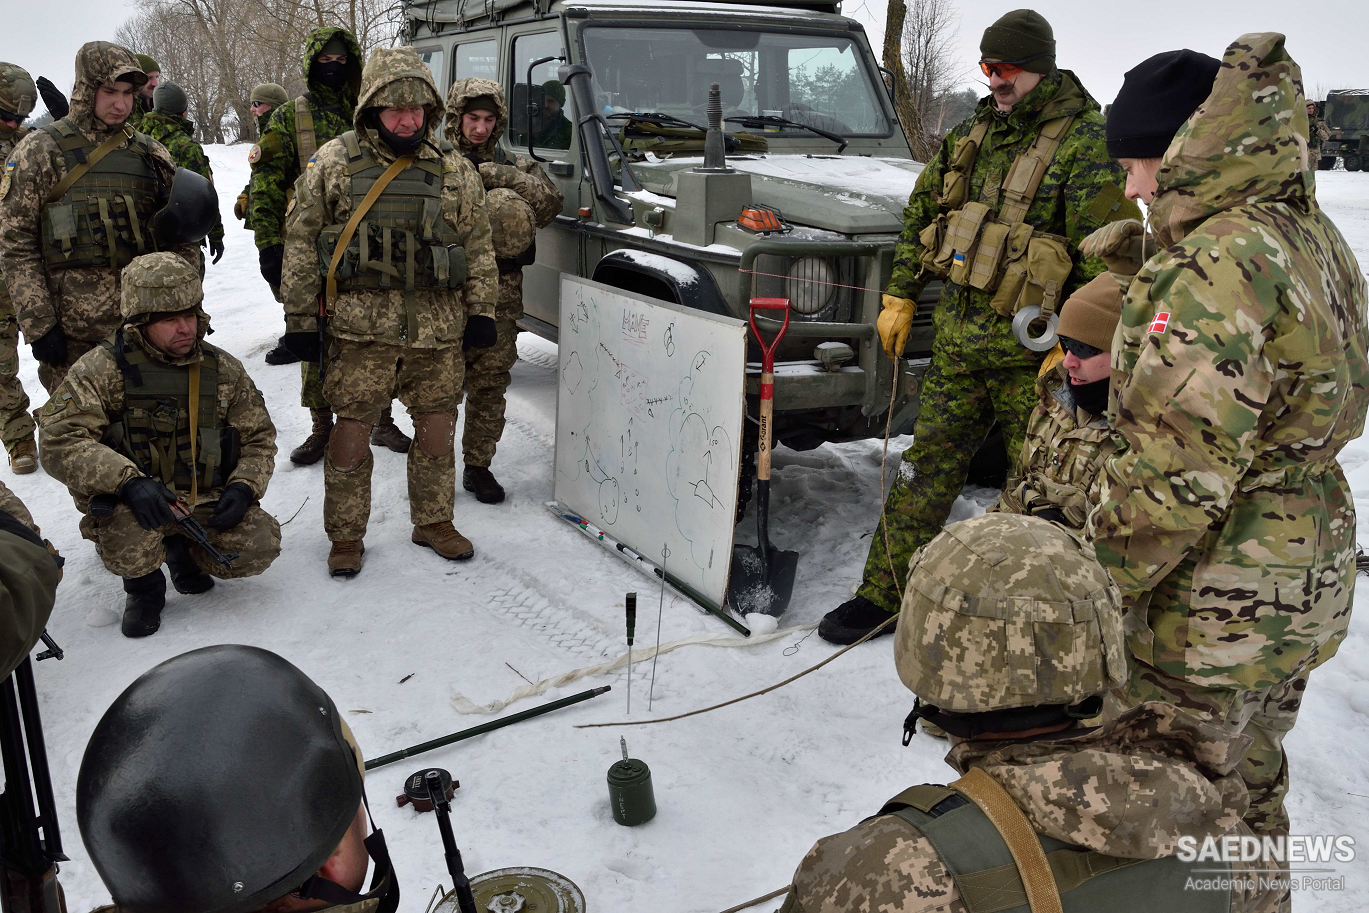 Canada to boost troops on ground in Ukraine